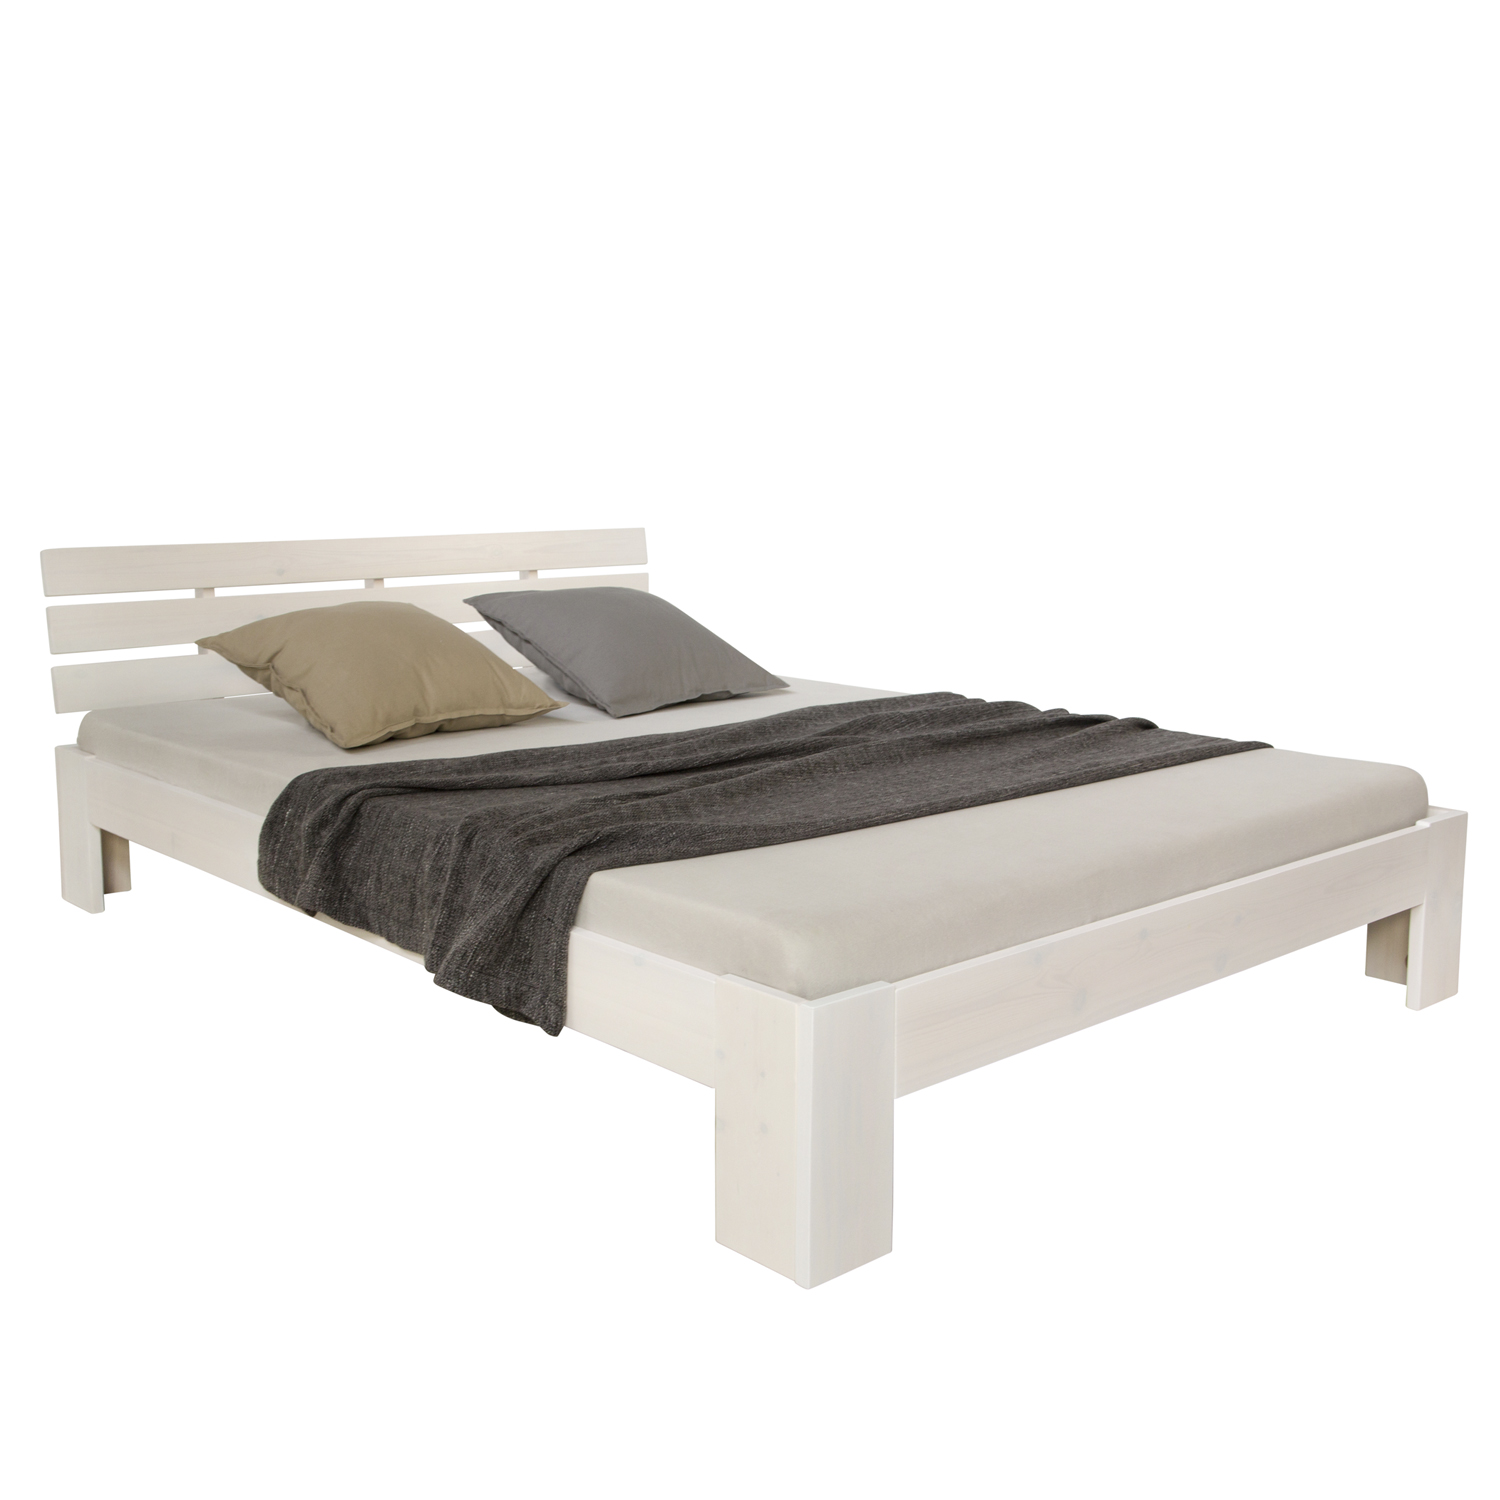 Double Bed with Mattress and Slatted Frame 140x200 Bed White Solid Pine Bedstead Wooden Bed Futon Bed